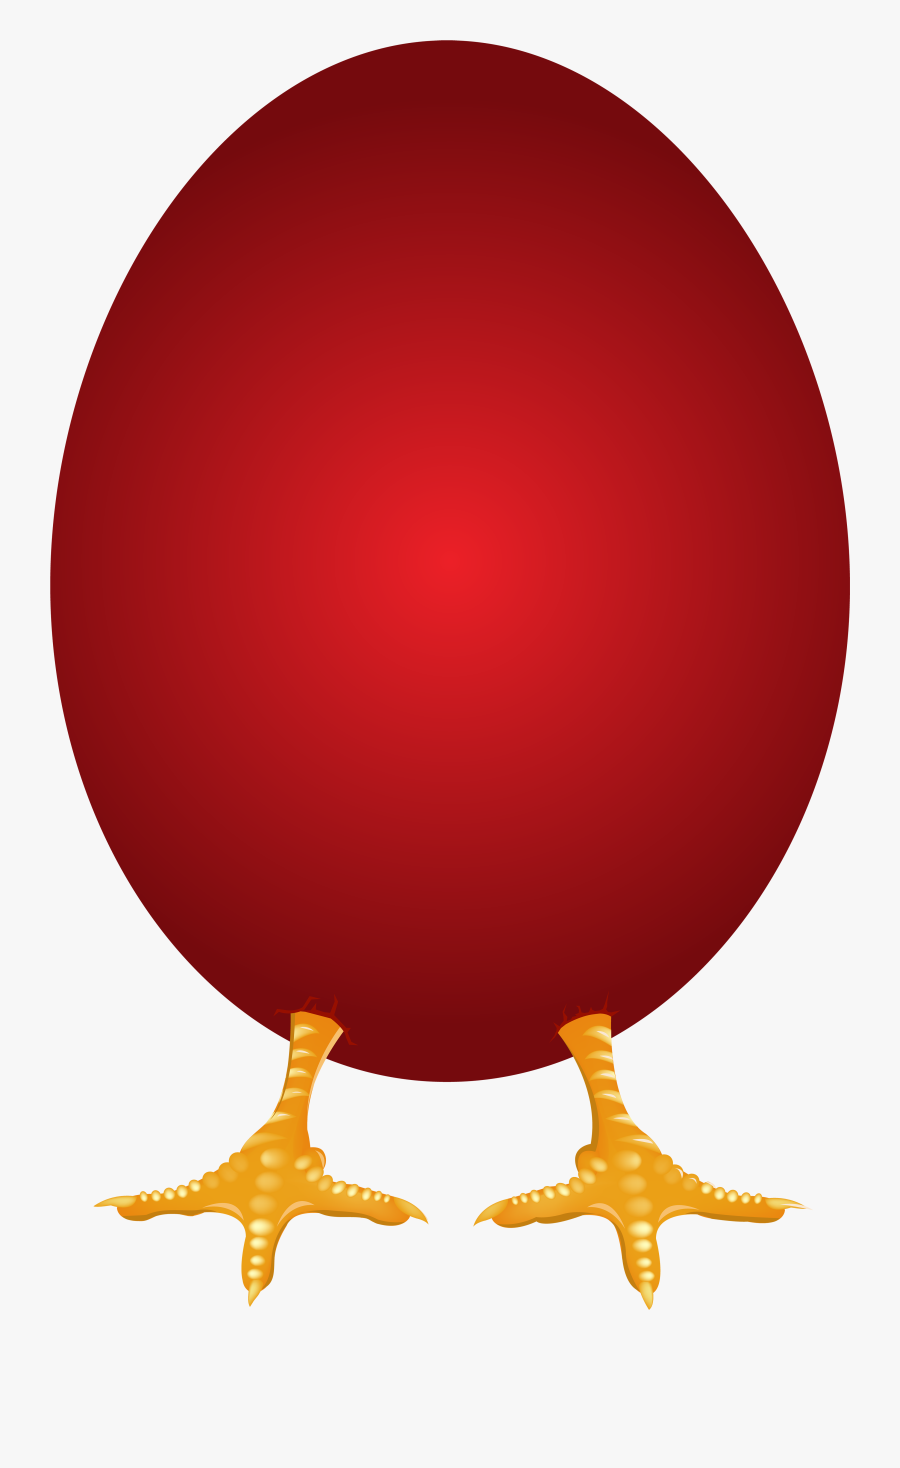 Compression With Easter File Formats Legs Egg Clipart - Sphere, Transparent Clipart